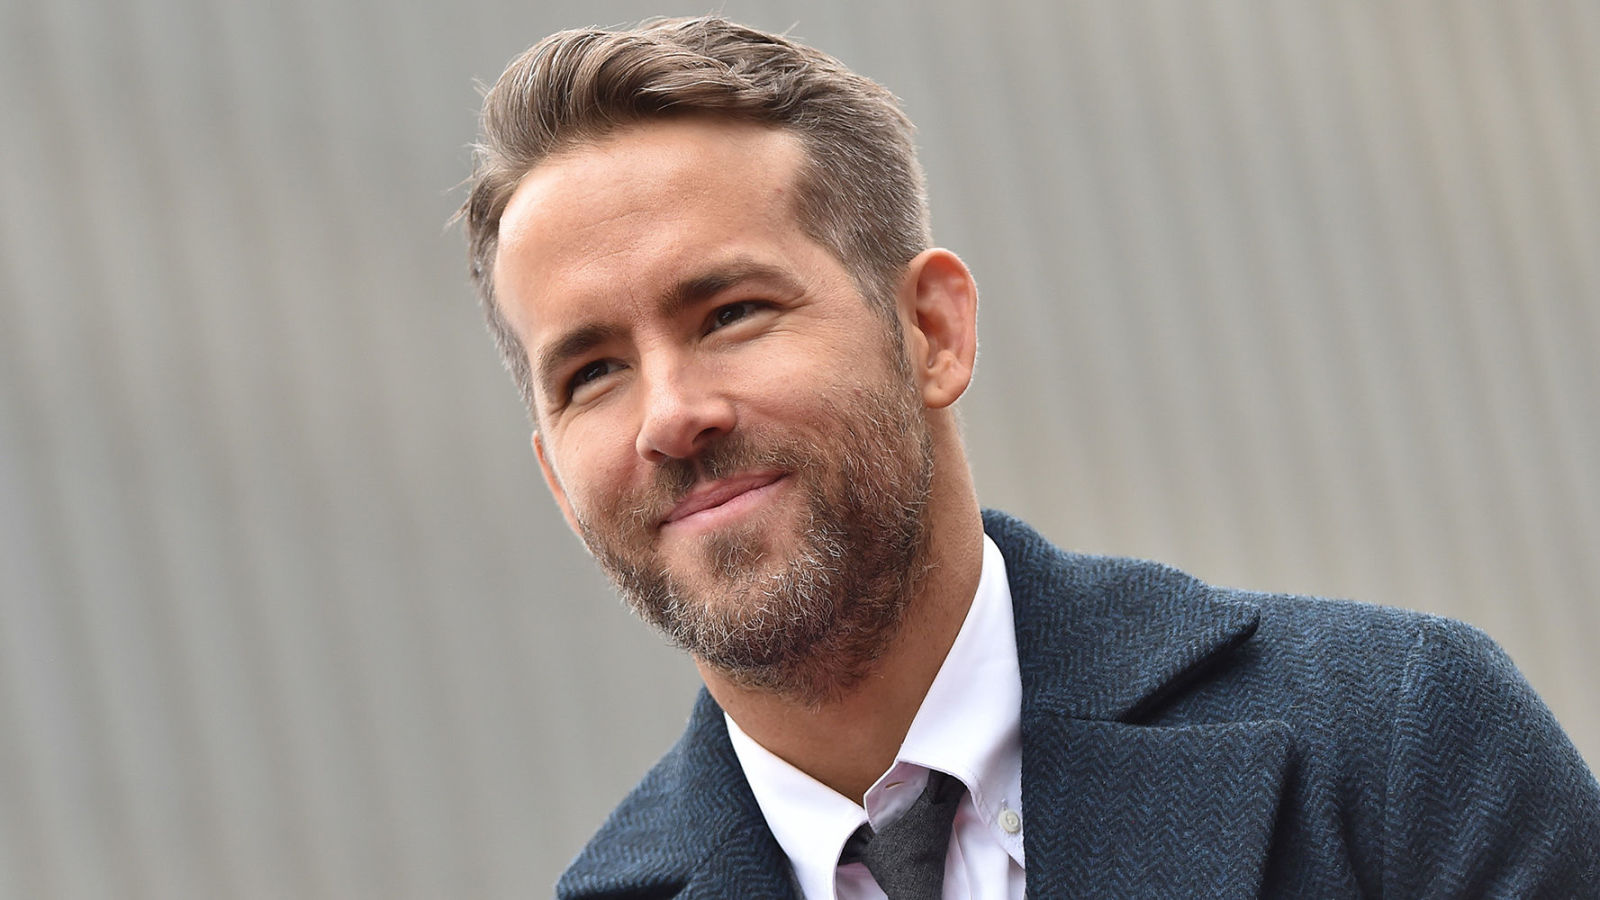 bryan fooks recommends ryan reynolds jerking off pic